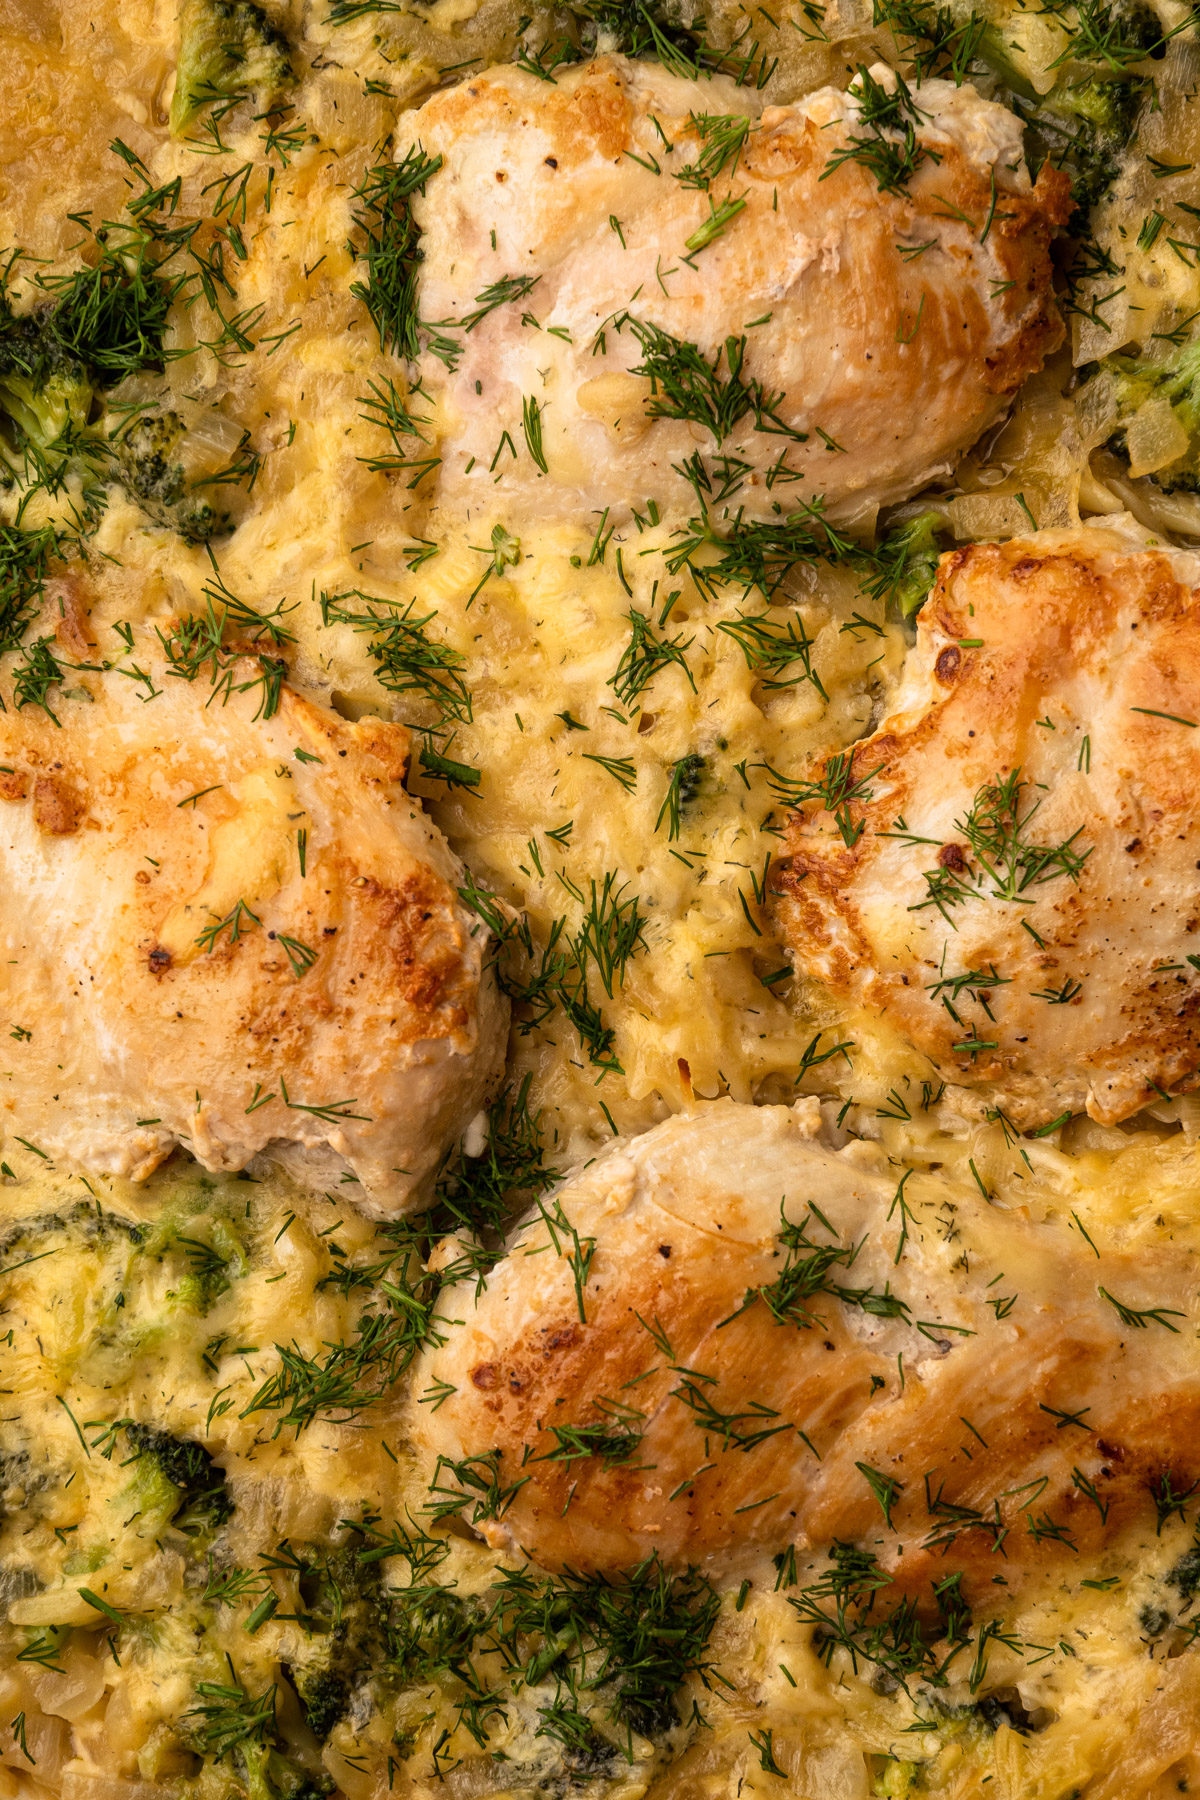 Chicken and orzo bake with broccoli and dill.